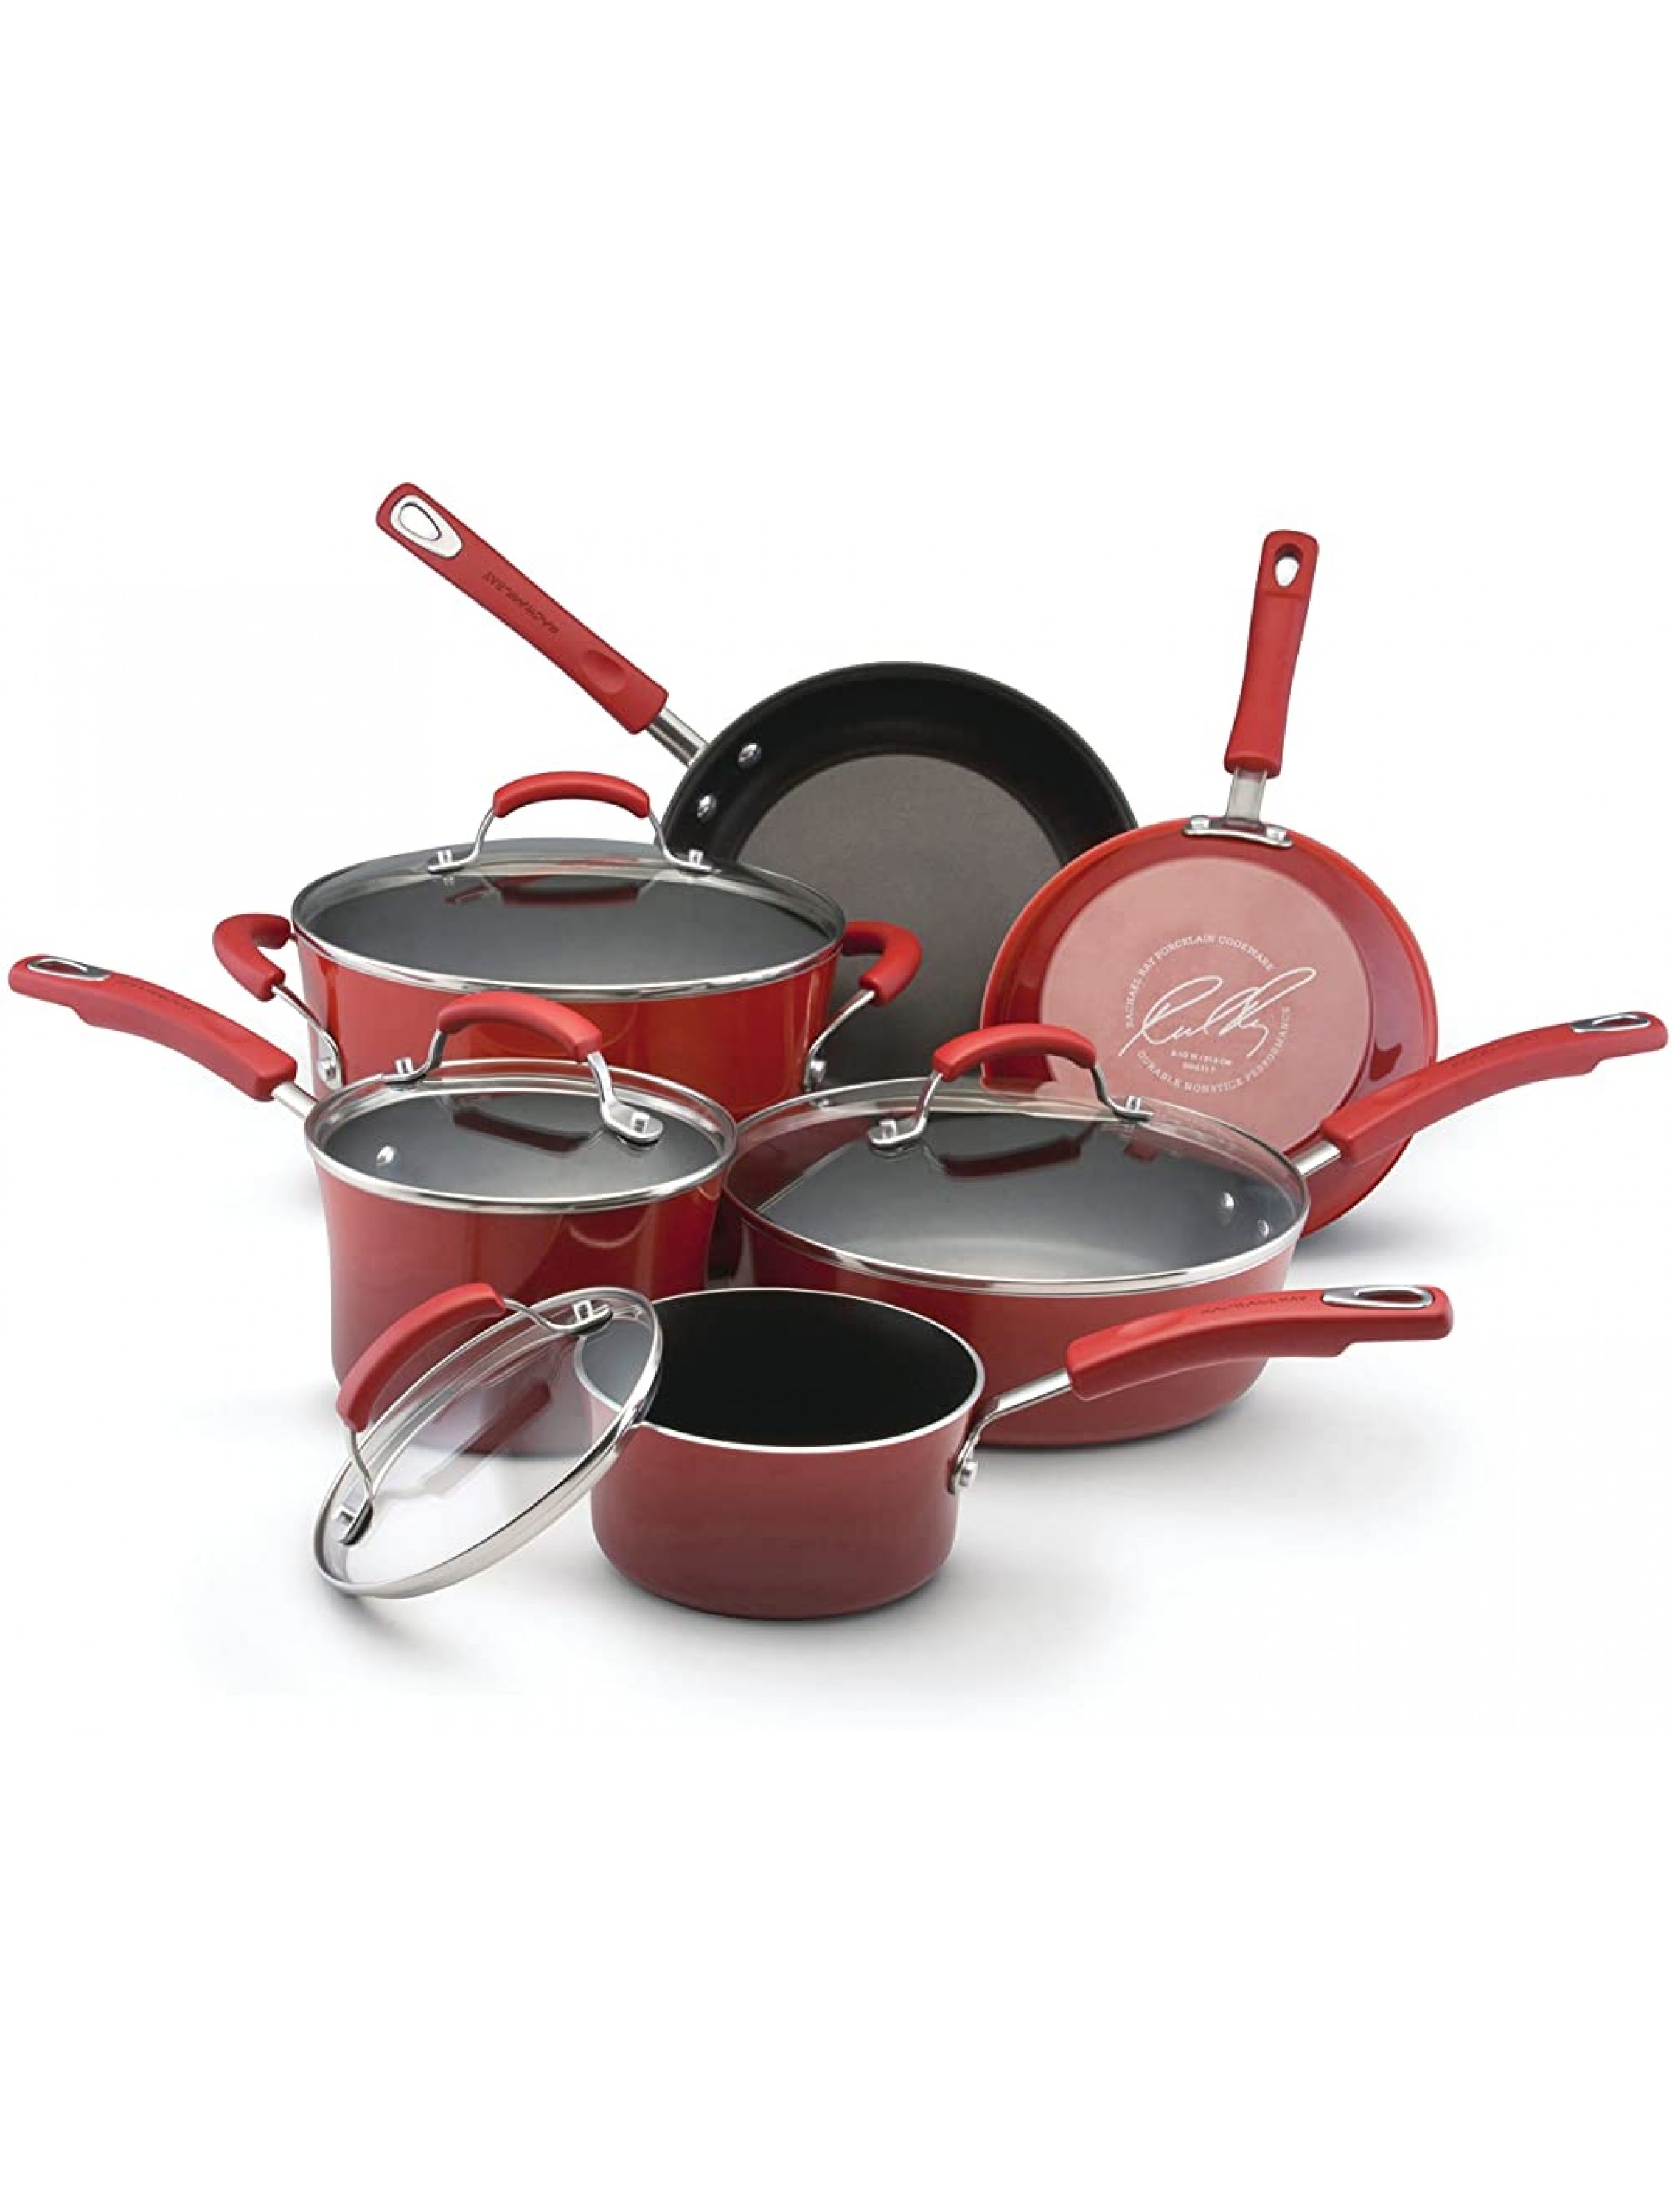 Rachael Ray Brights Nonstick Cookware Set Pots and Pans Set 10 Piece Red - B8H71WLL0